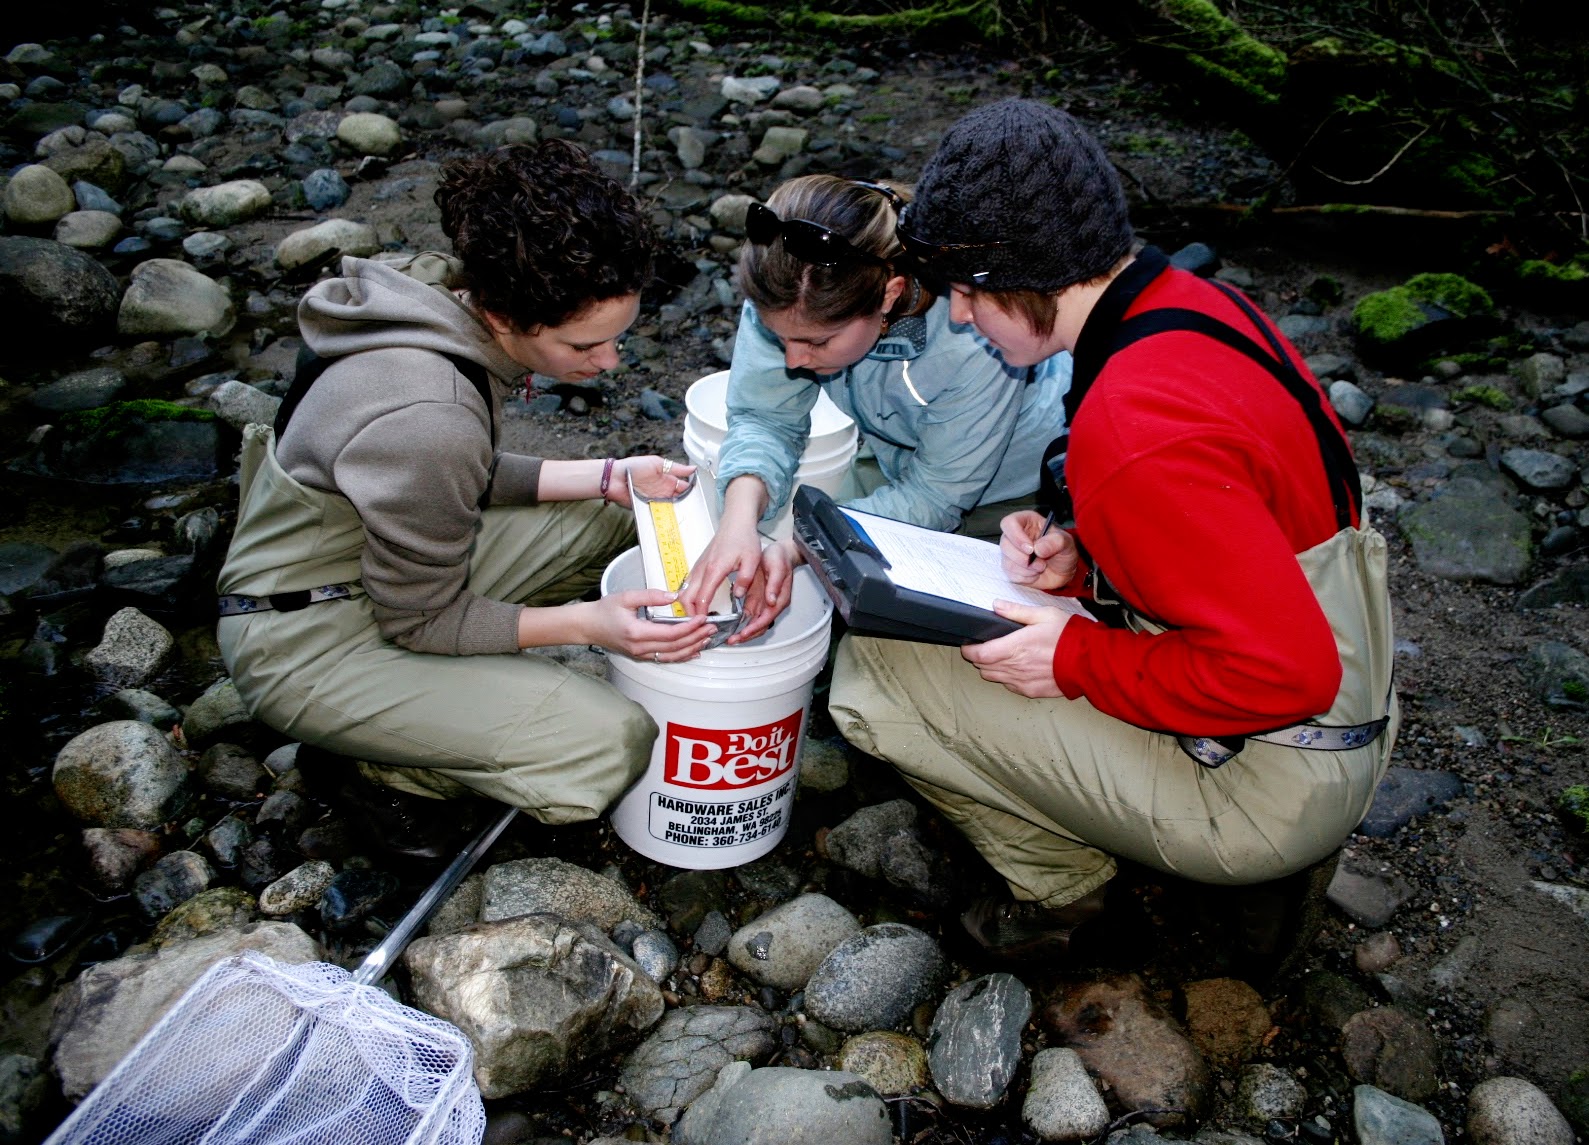 Environmental Science Students recording data and analyzing samples on a rocky river bed